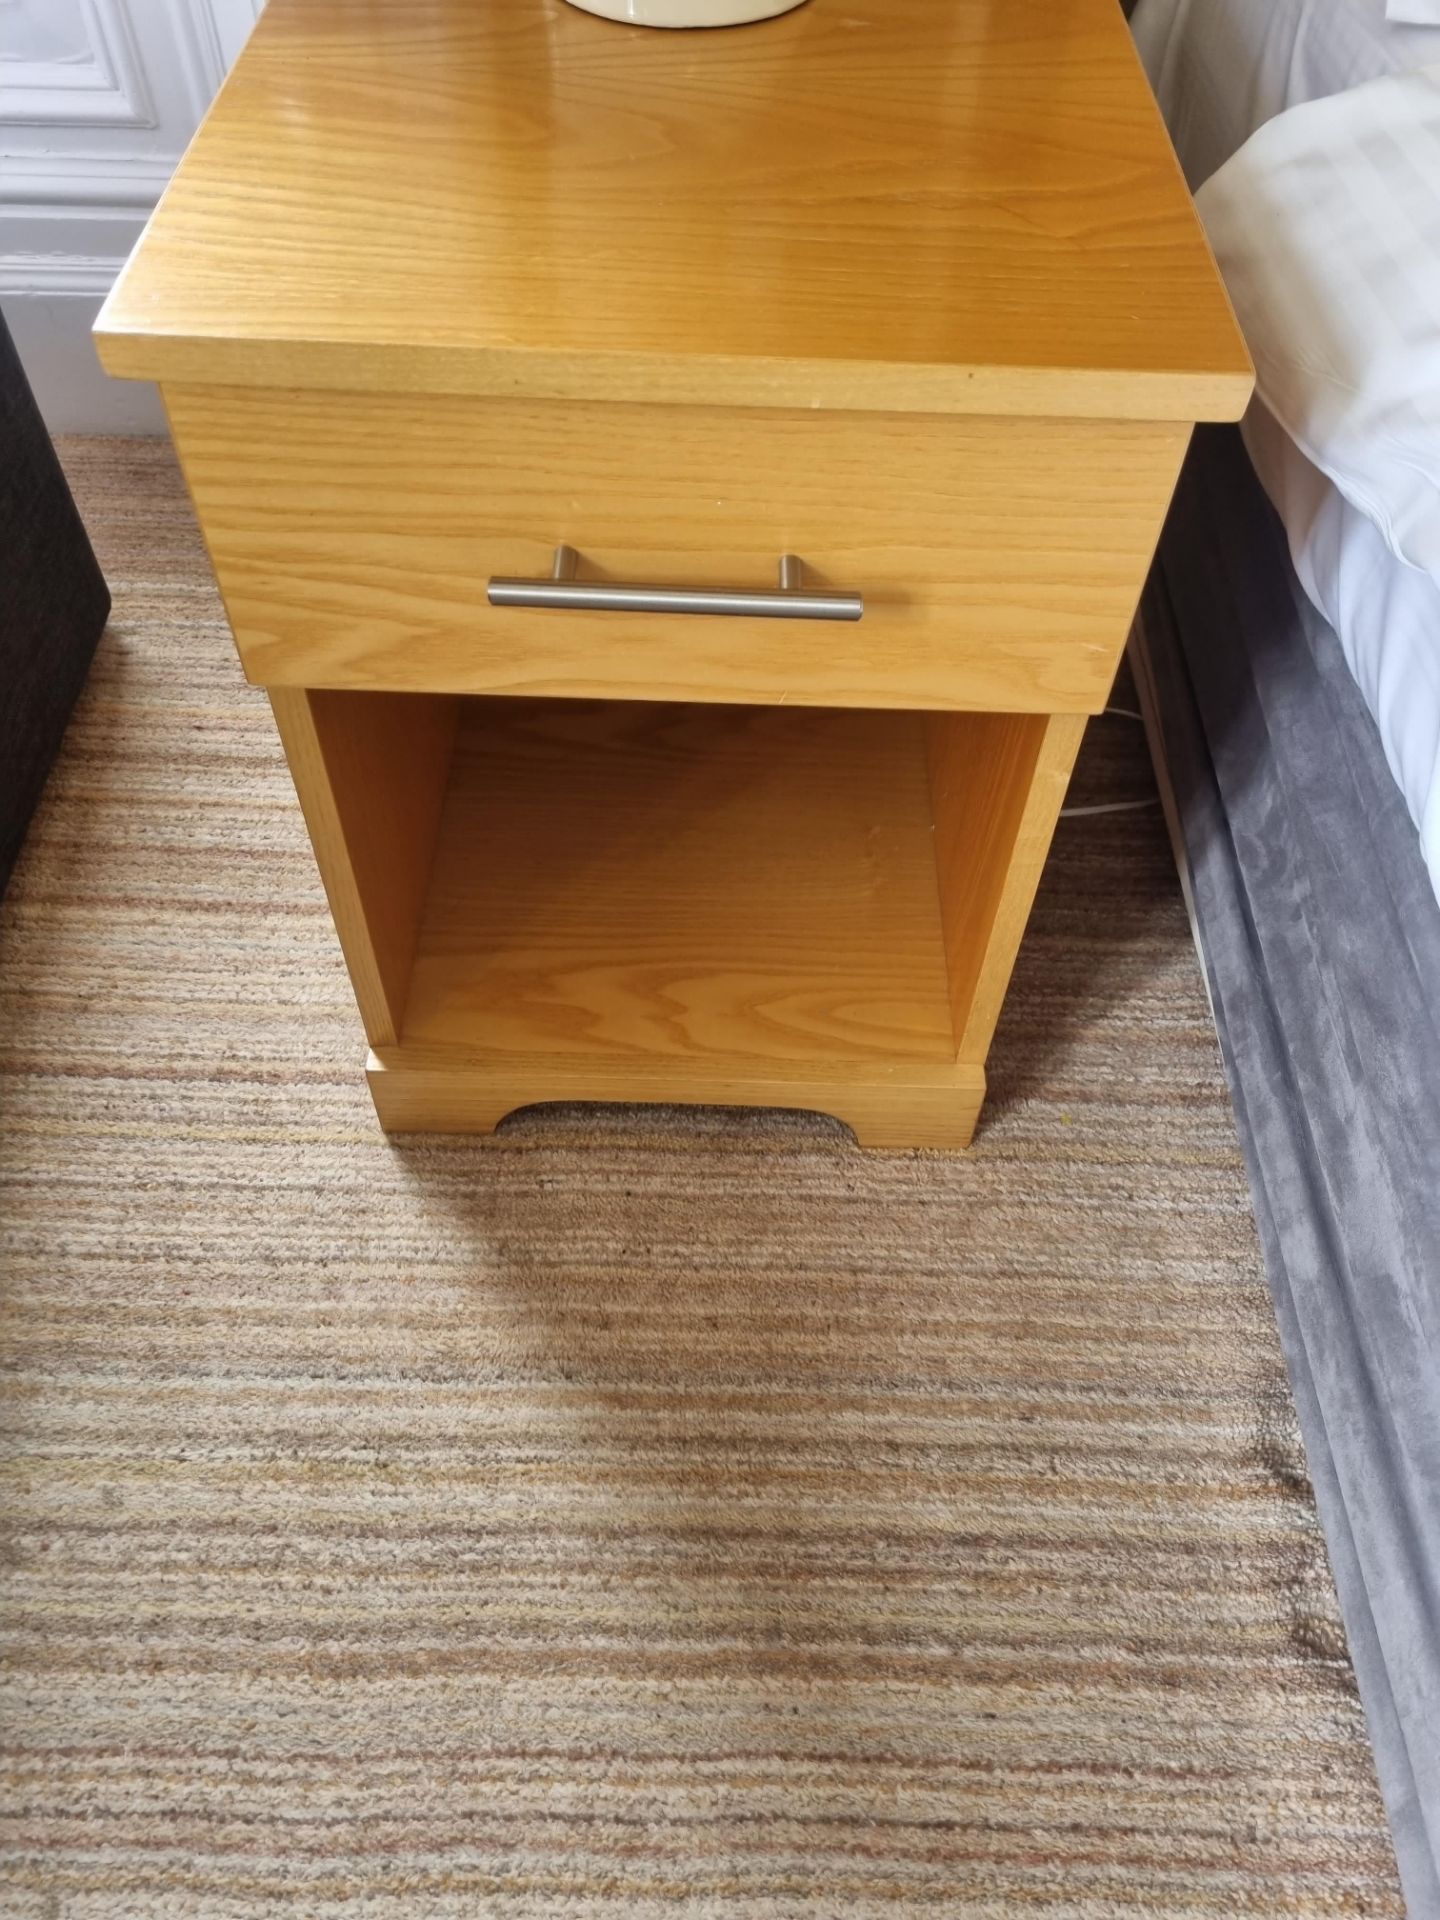 2x Pine One Drawer Bedside Cabinets W 430mm D 520mm H 580mm (4)